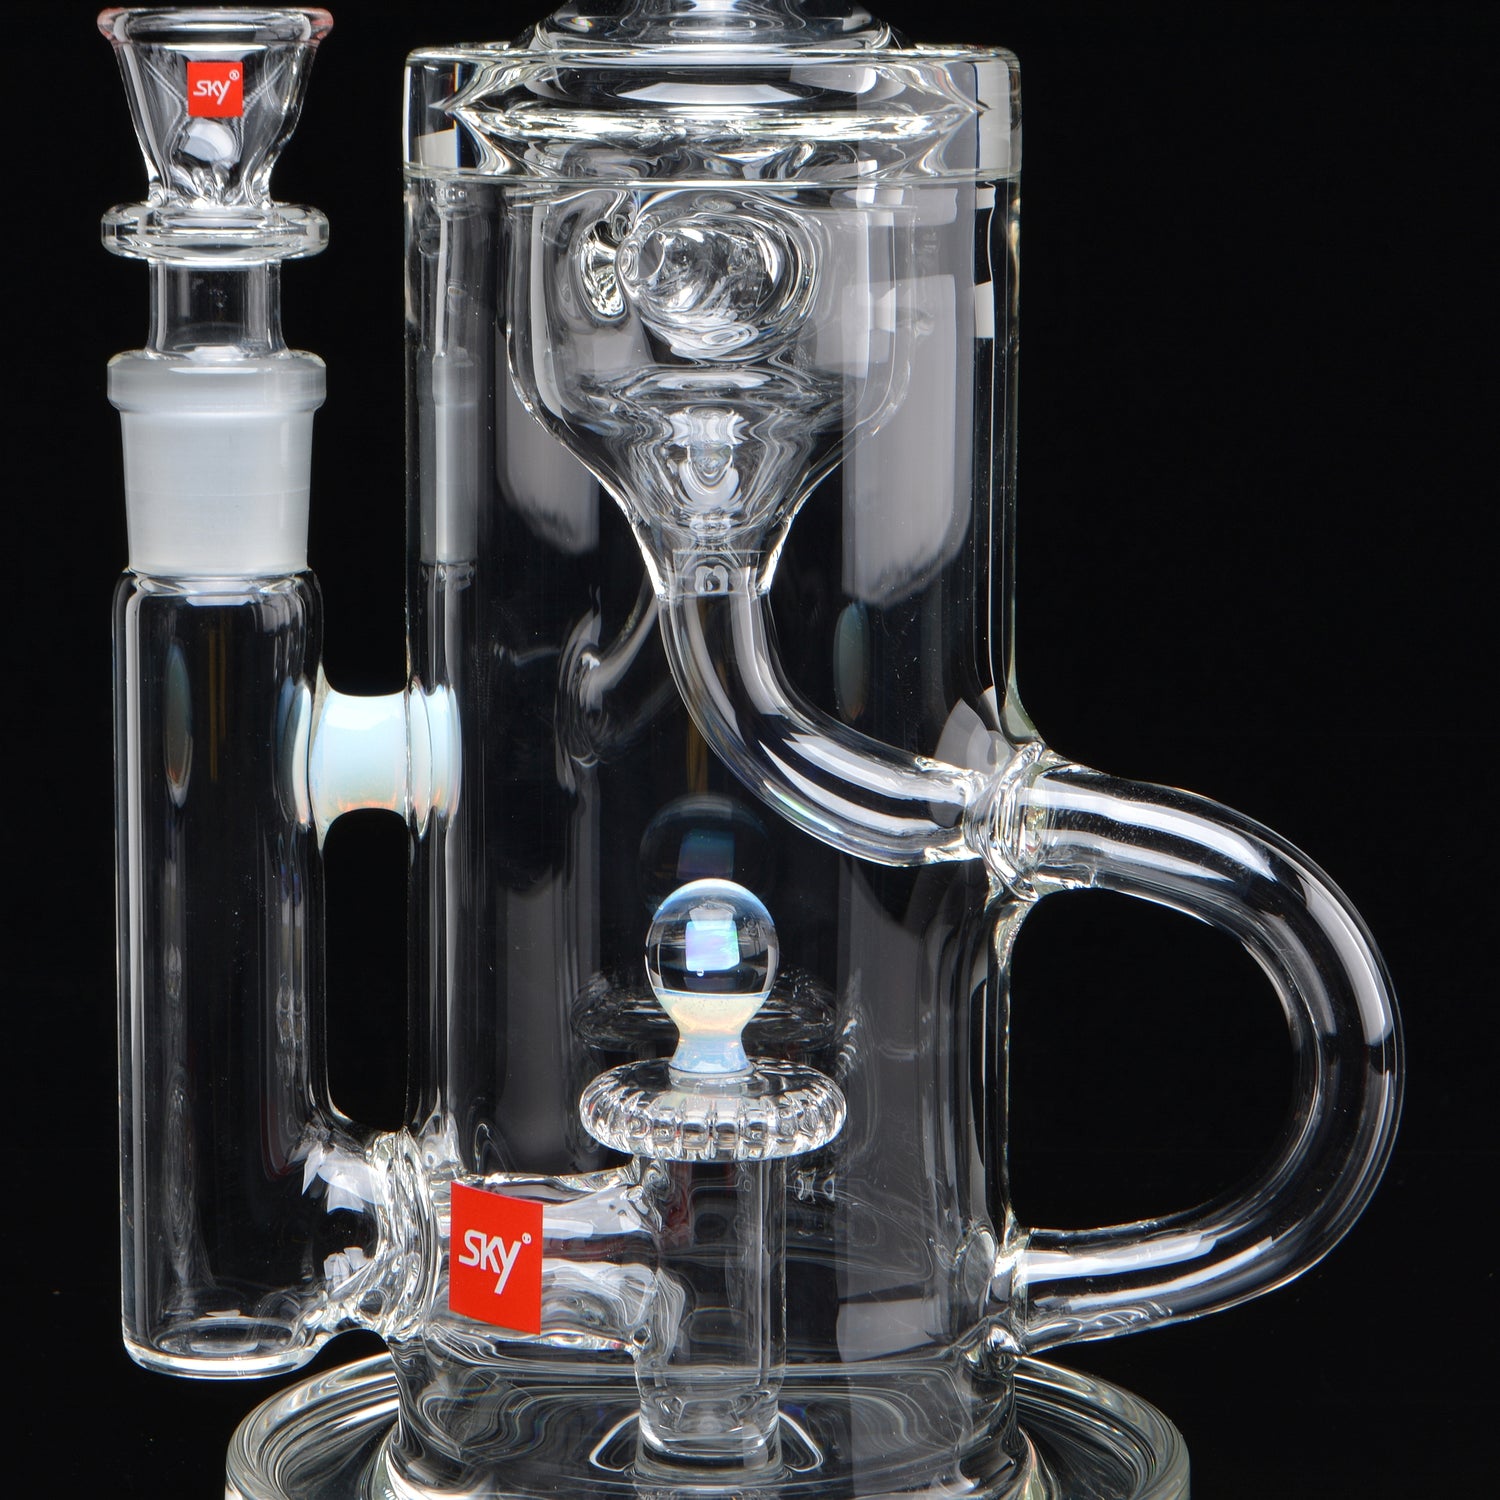 Close up of the internals of the recycler